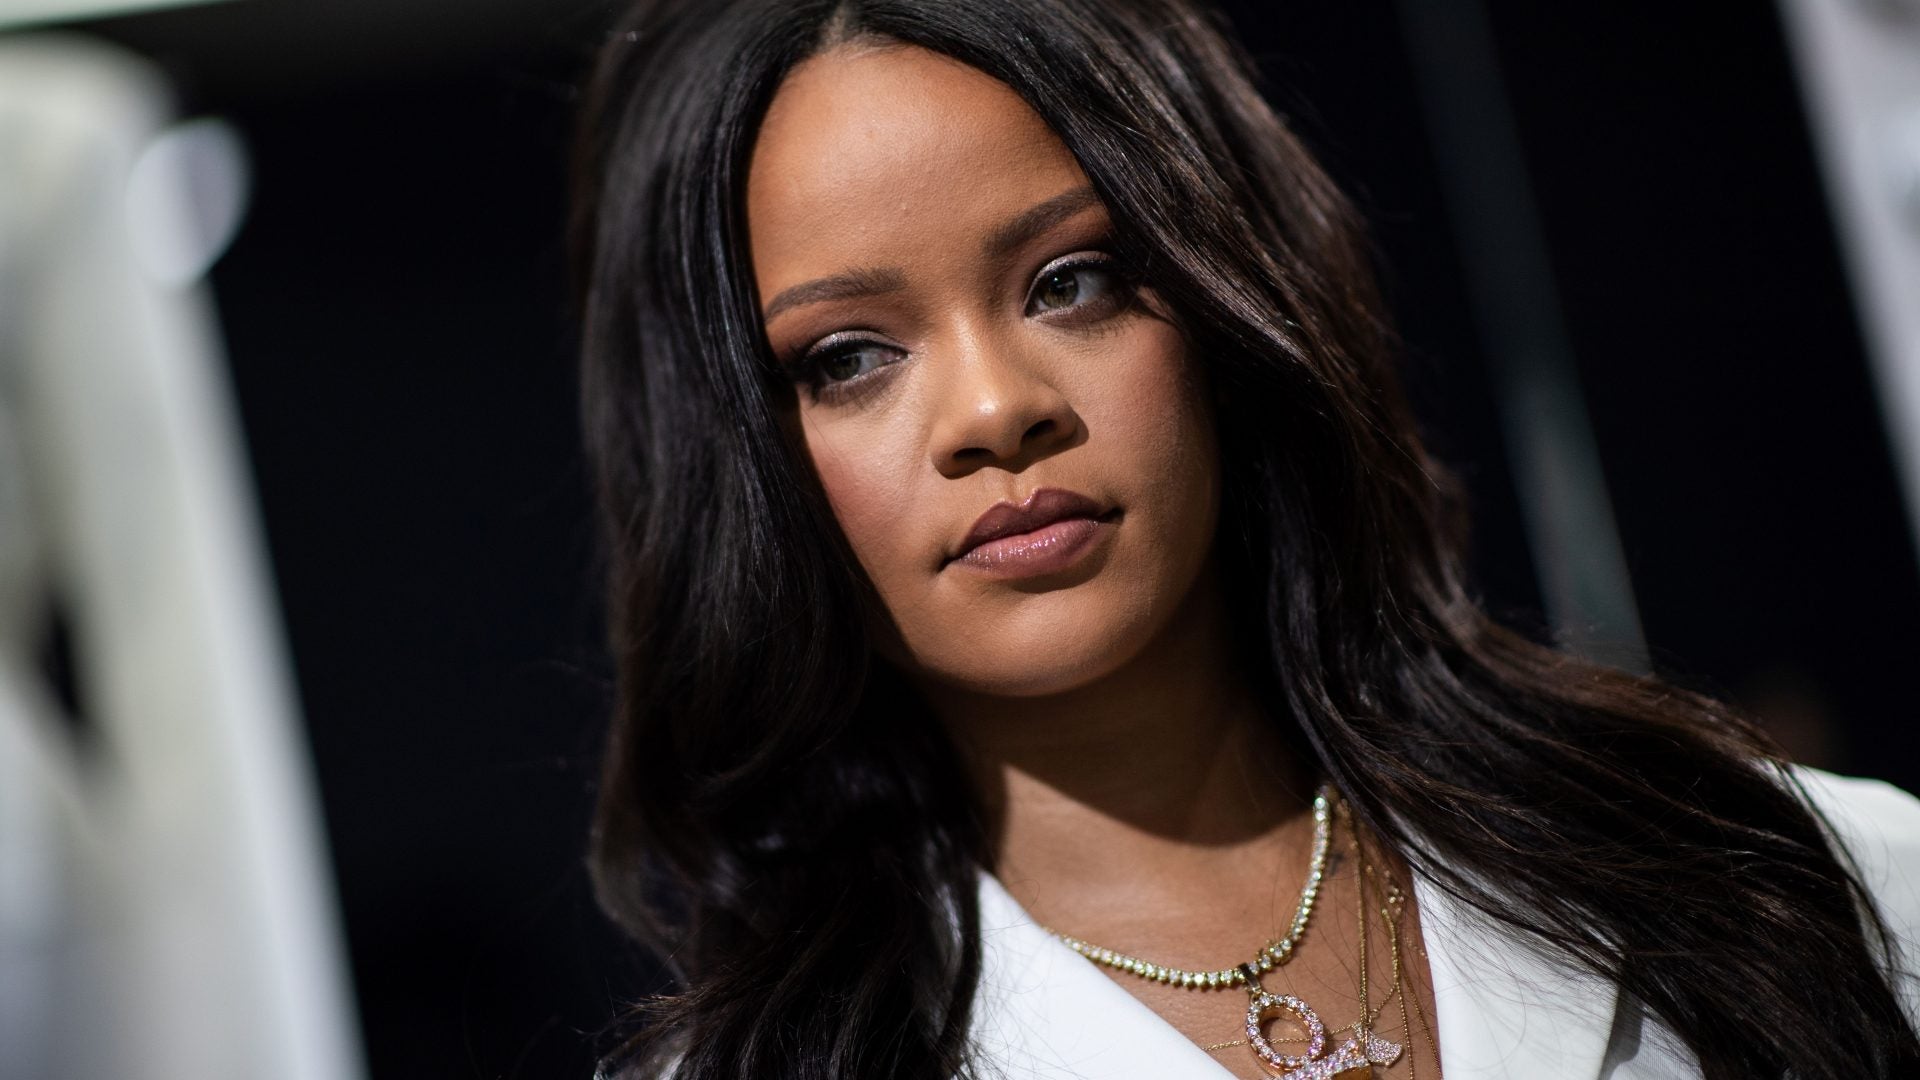 Rihanna Opens Up About Her Relationship: 'It Matters To Me'